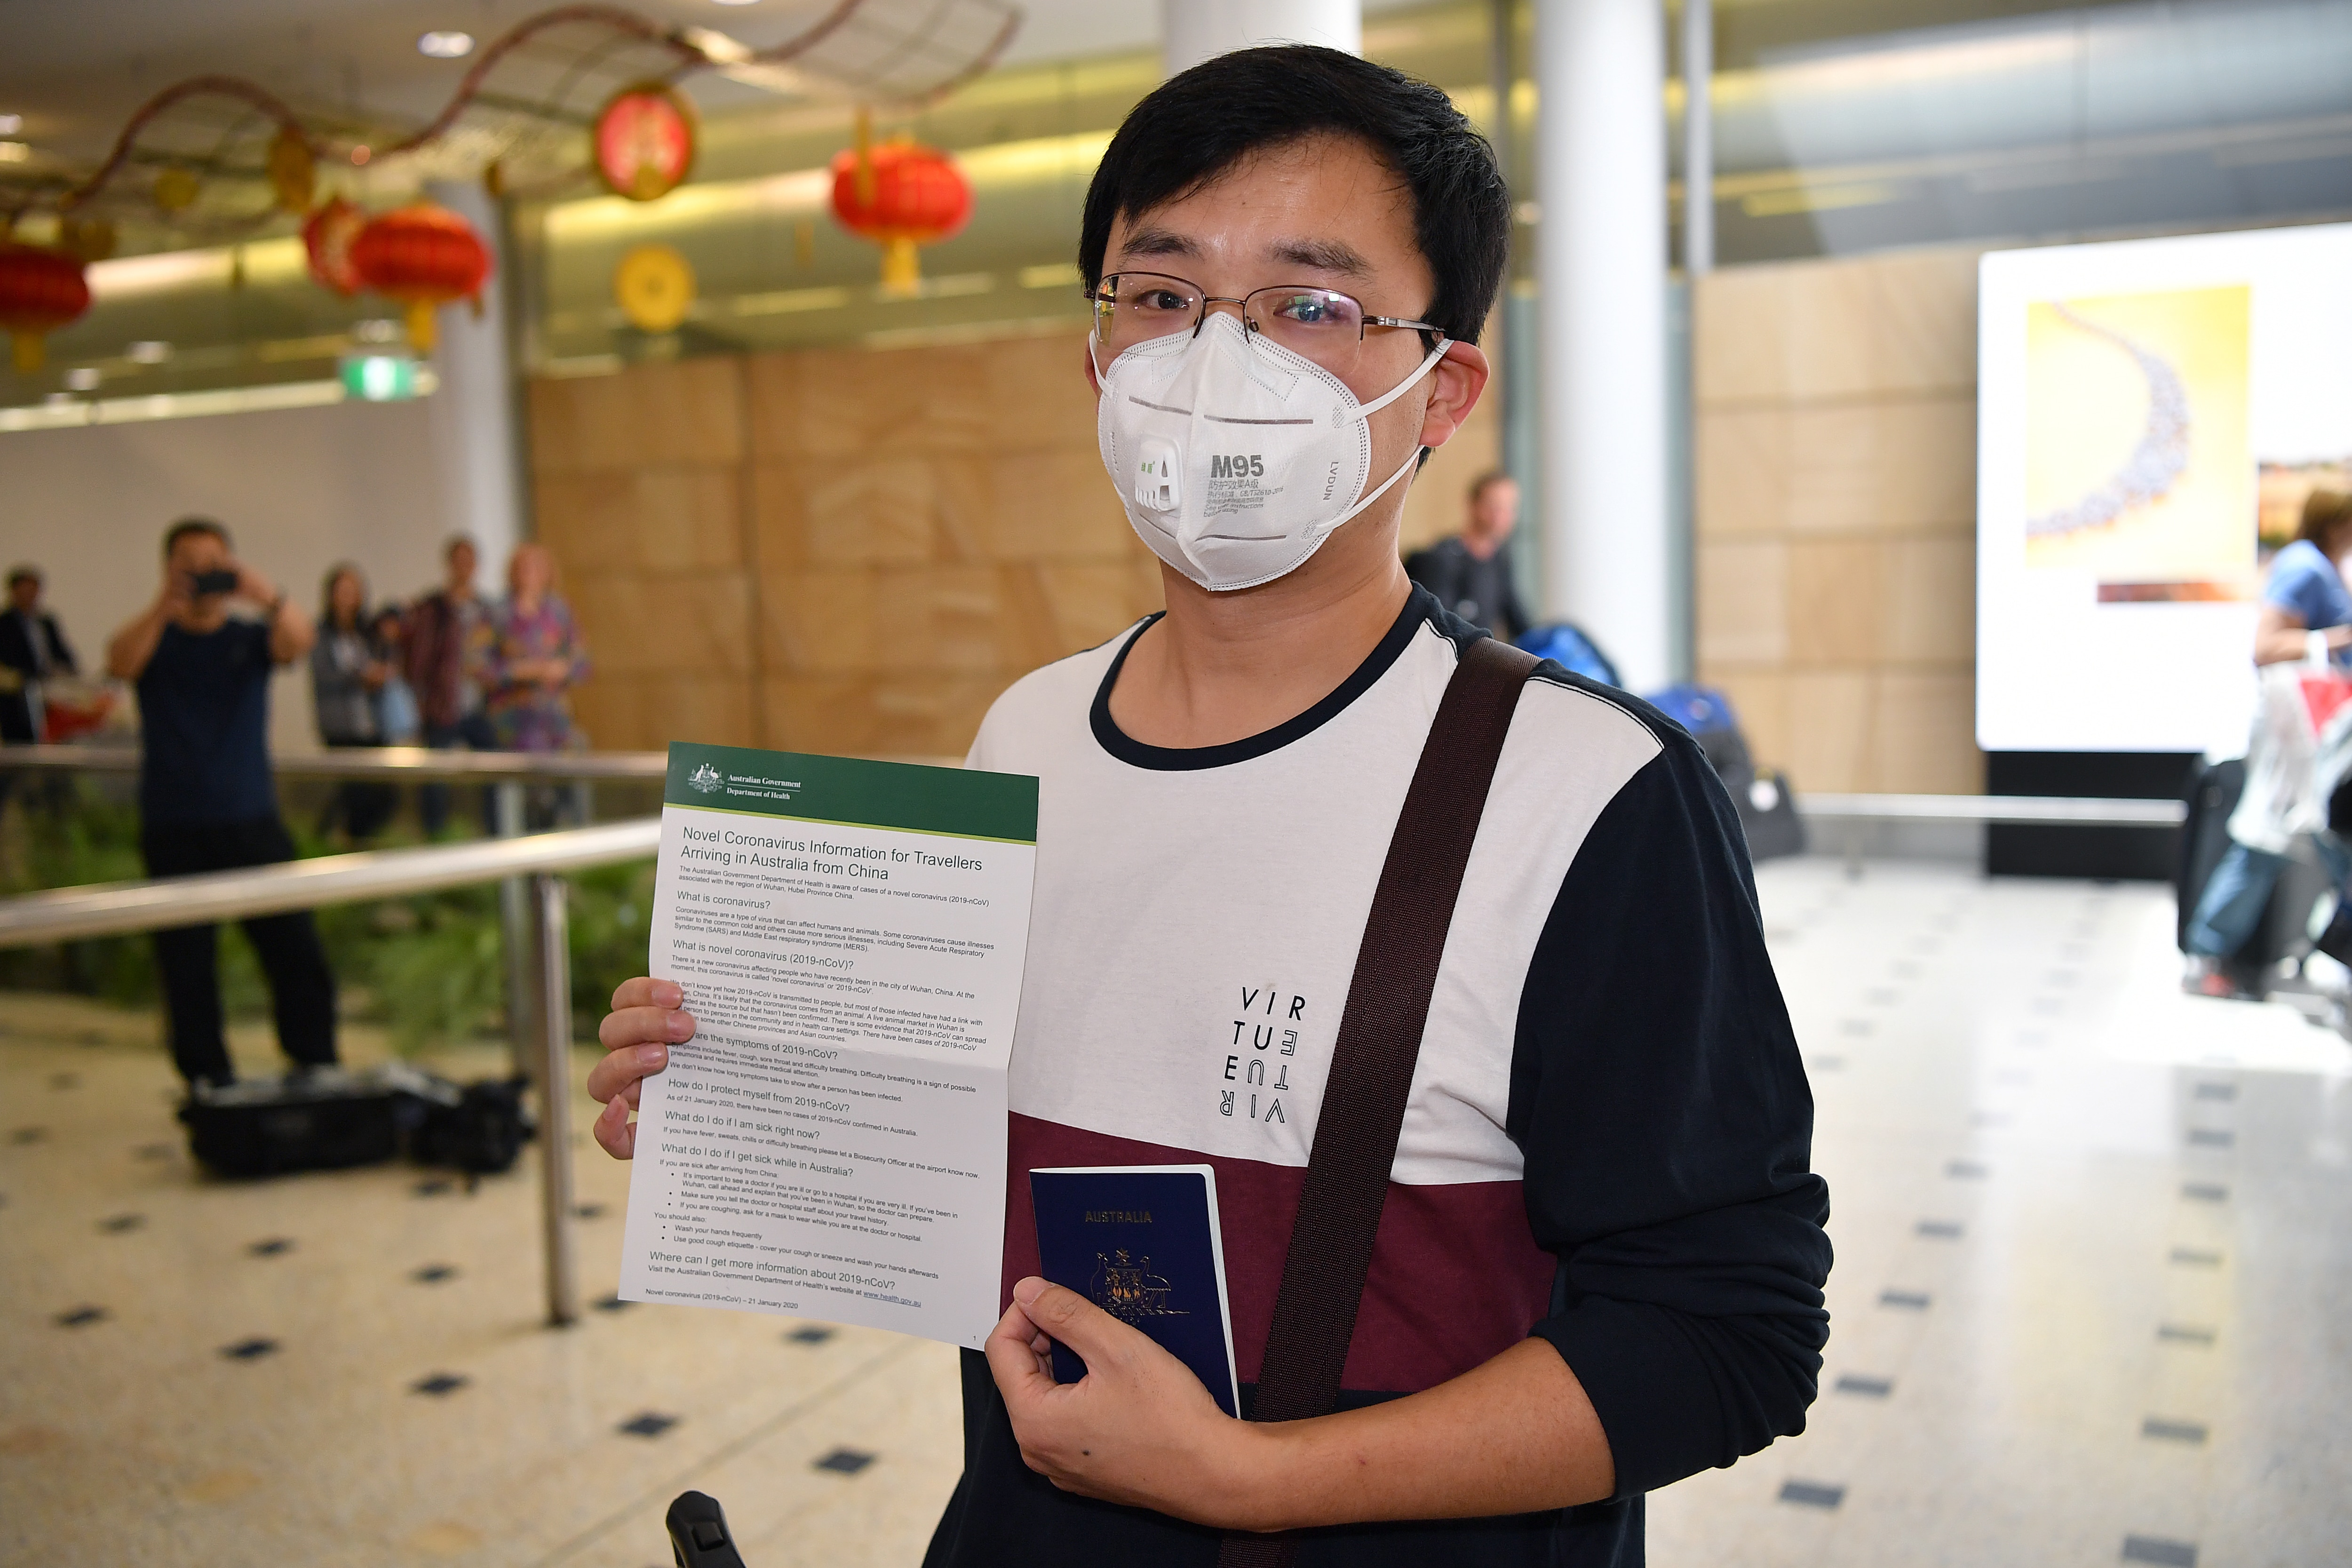 Australia is working to keep out the deadly coronavirus, as flights from China arrive in the country.